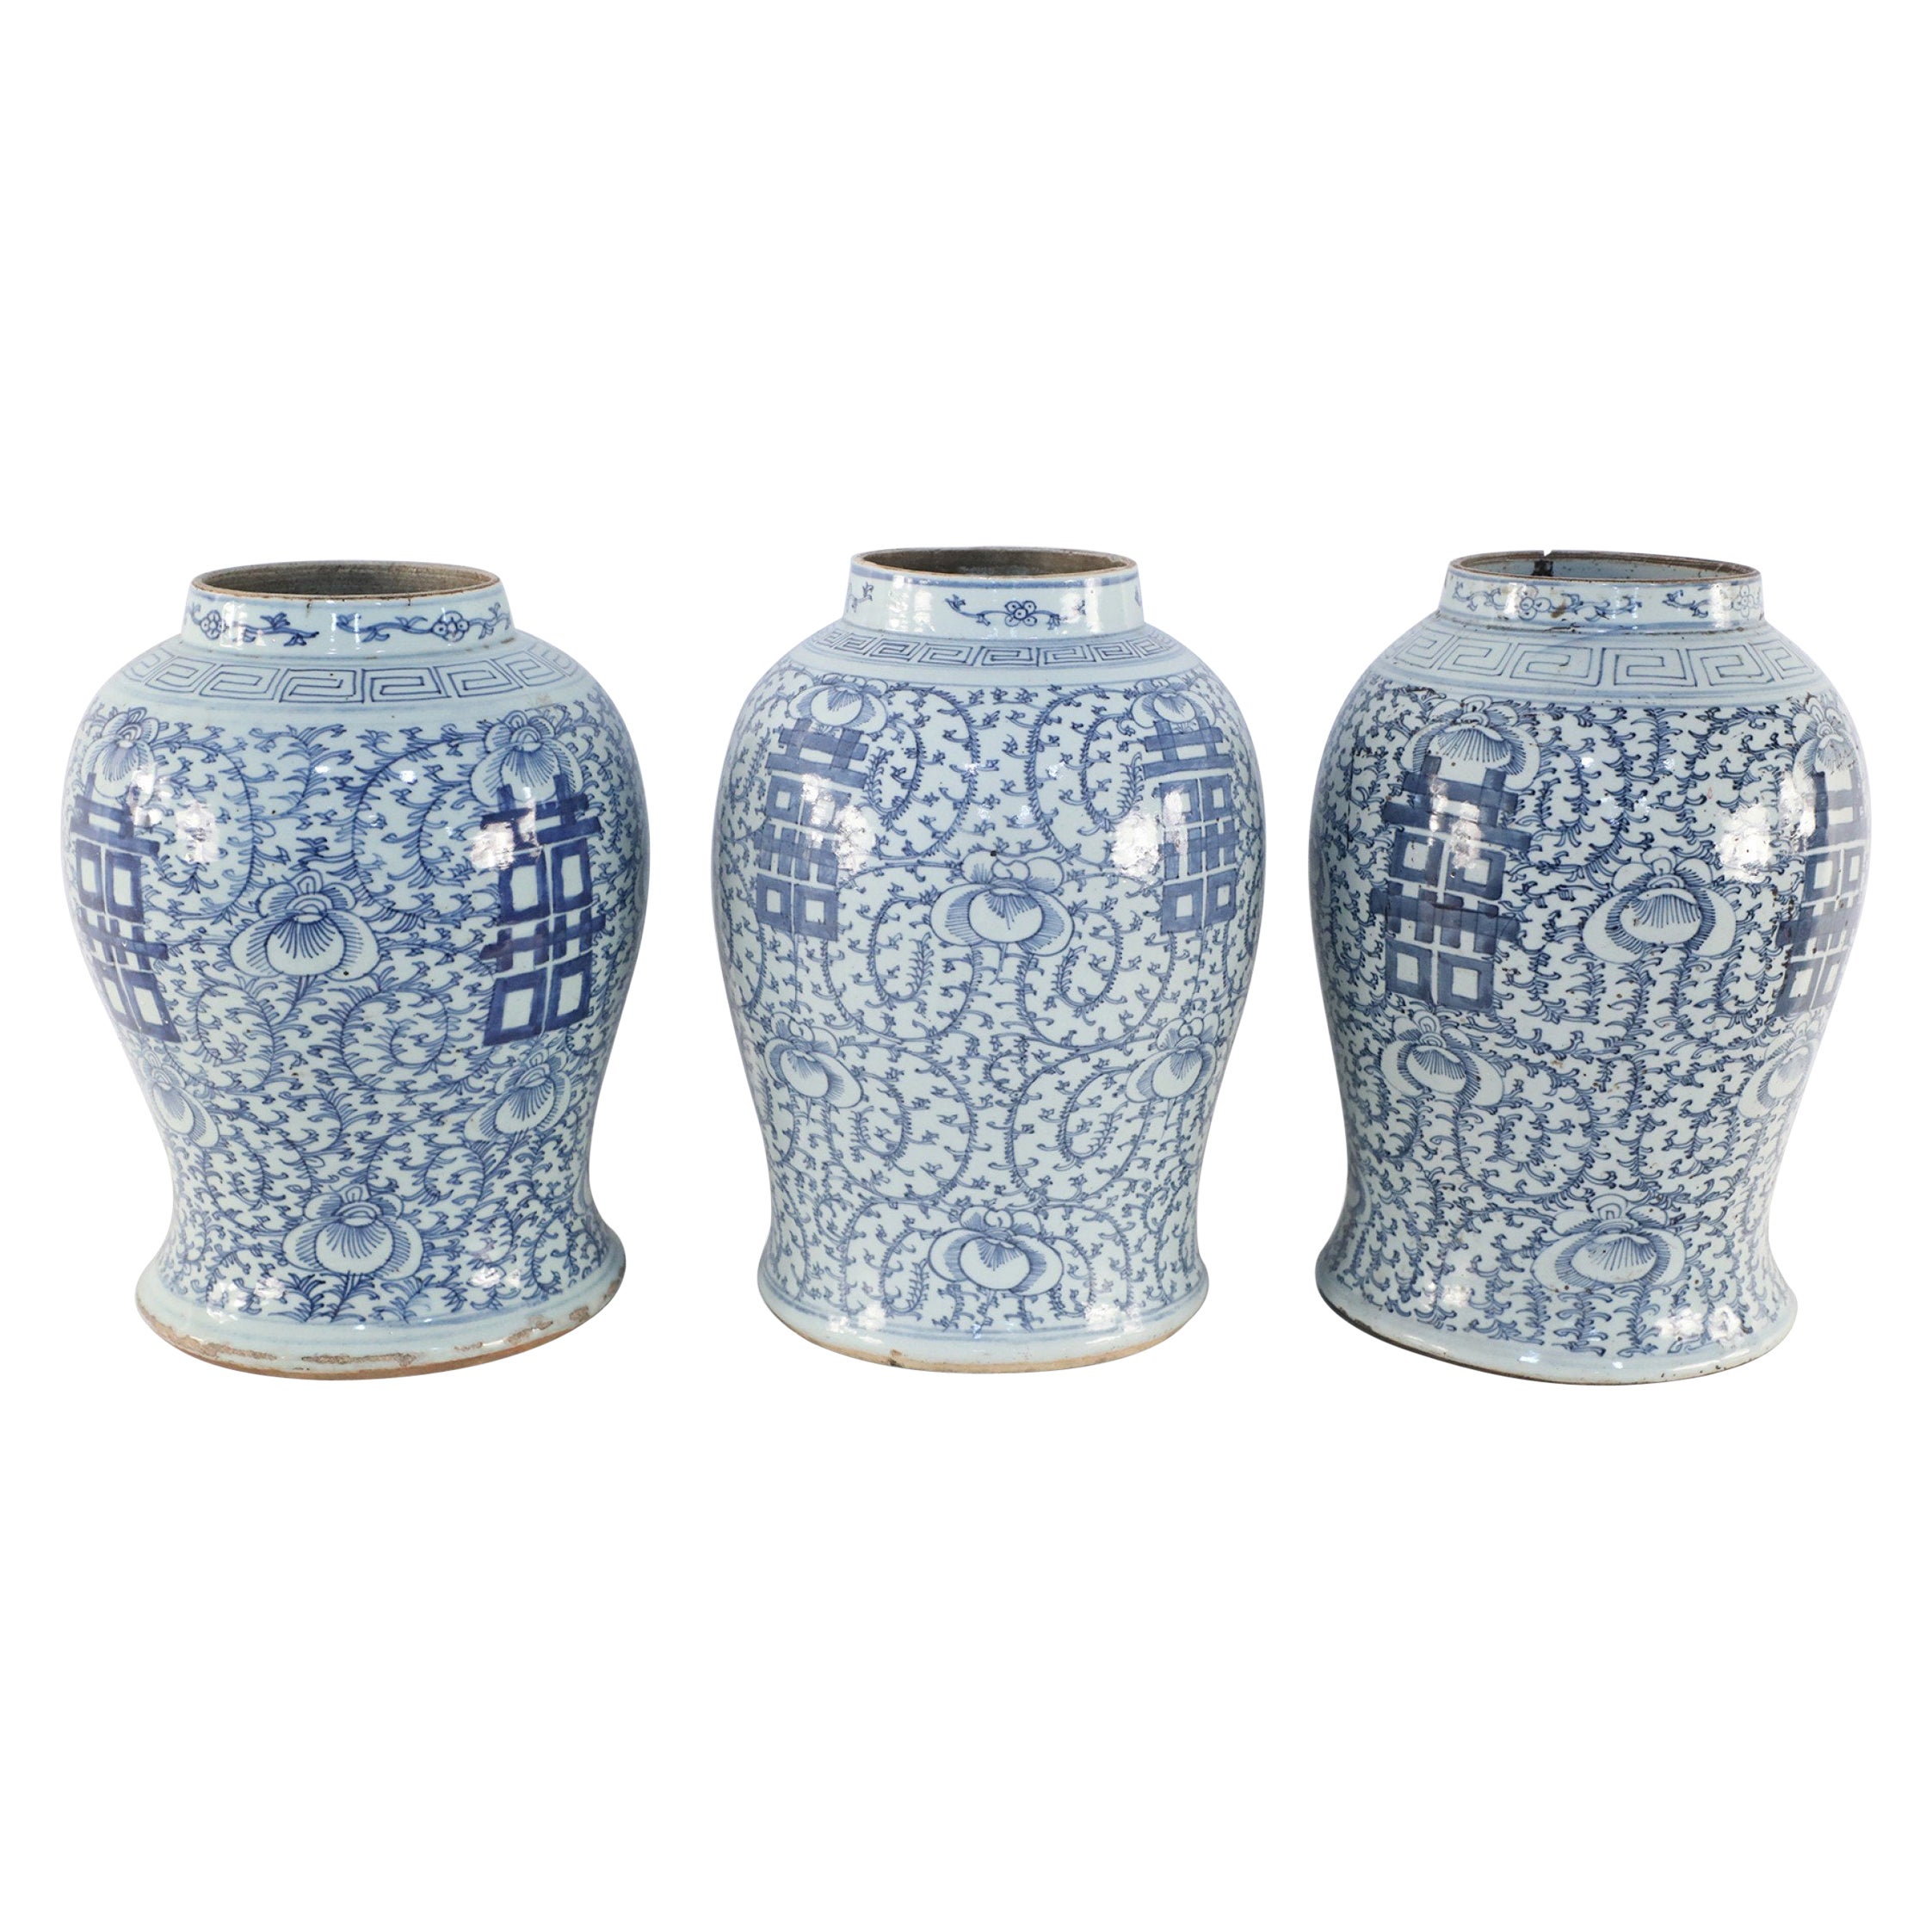 Chinese Off-White and Blue Vine Character Porcelain Urn Vases